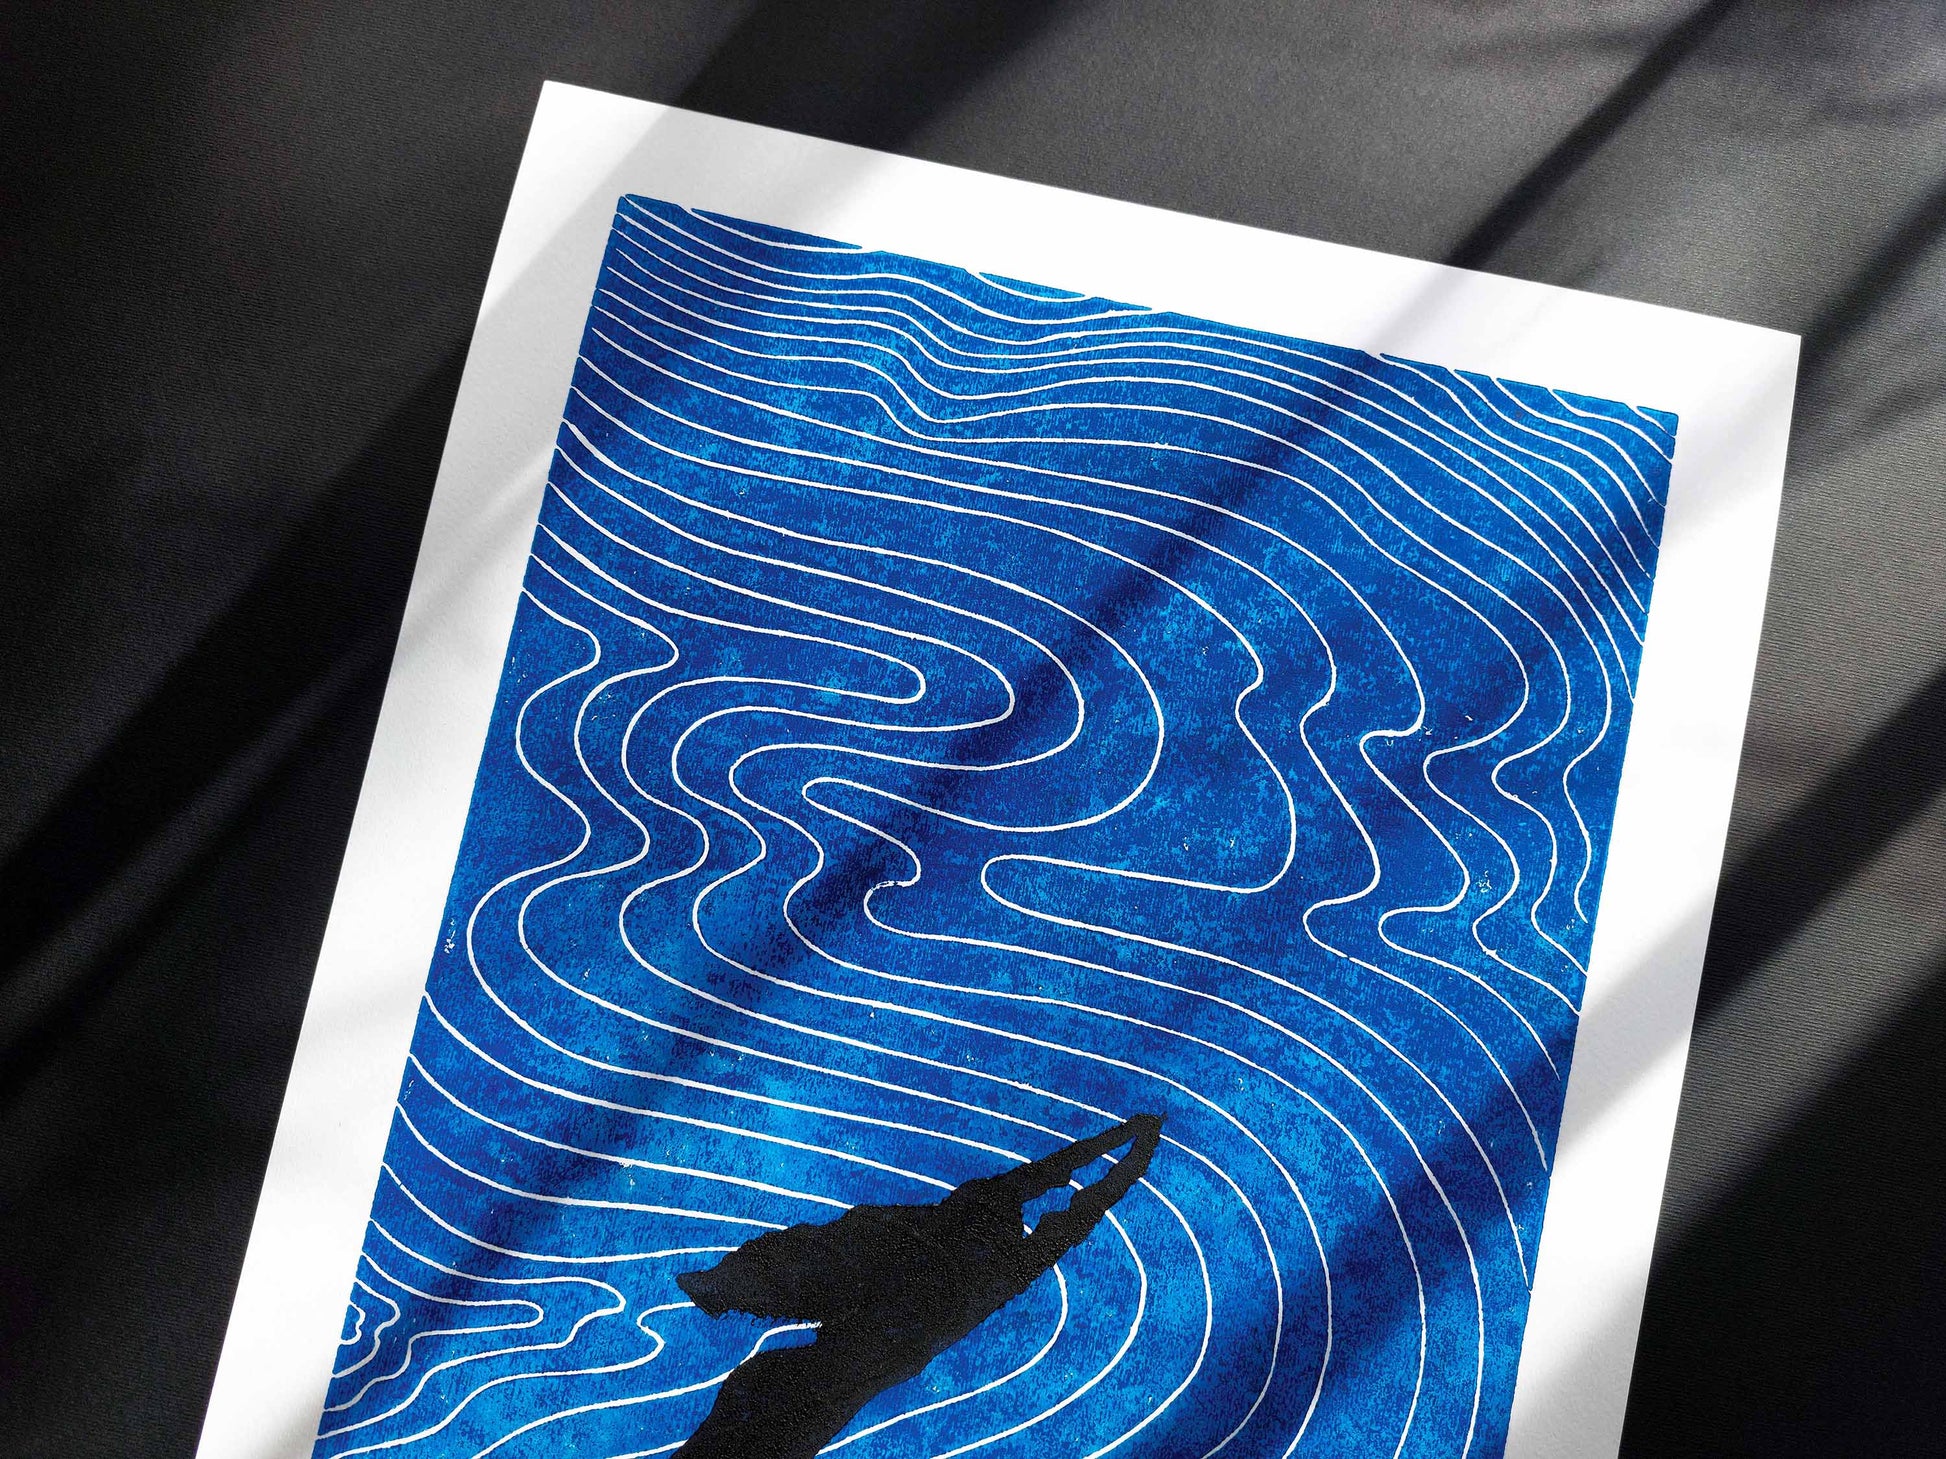 Girl swimming and Abstract blue water Linocut print art for Bedroom wall decor UNFRAMED for summer vibe in your bedroom, bathroom, living room, original artwork